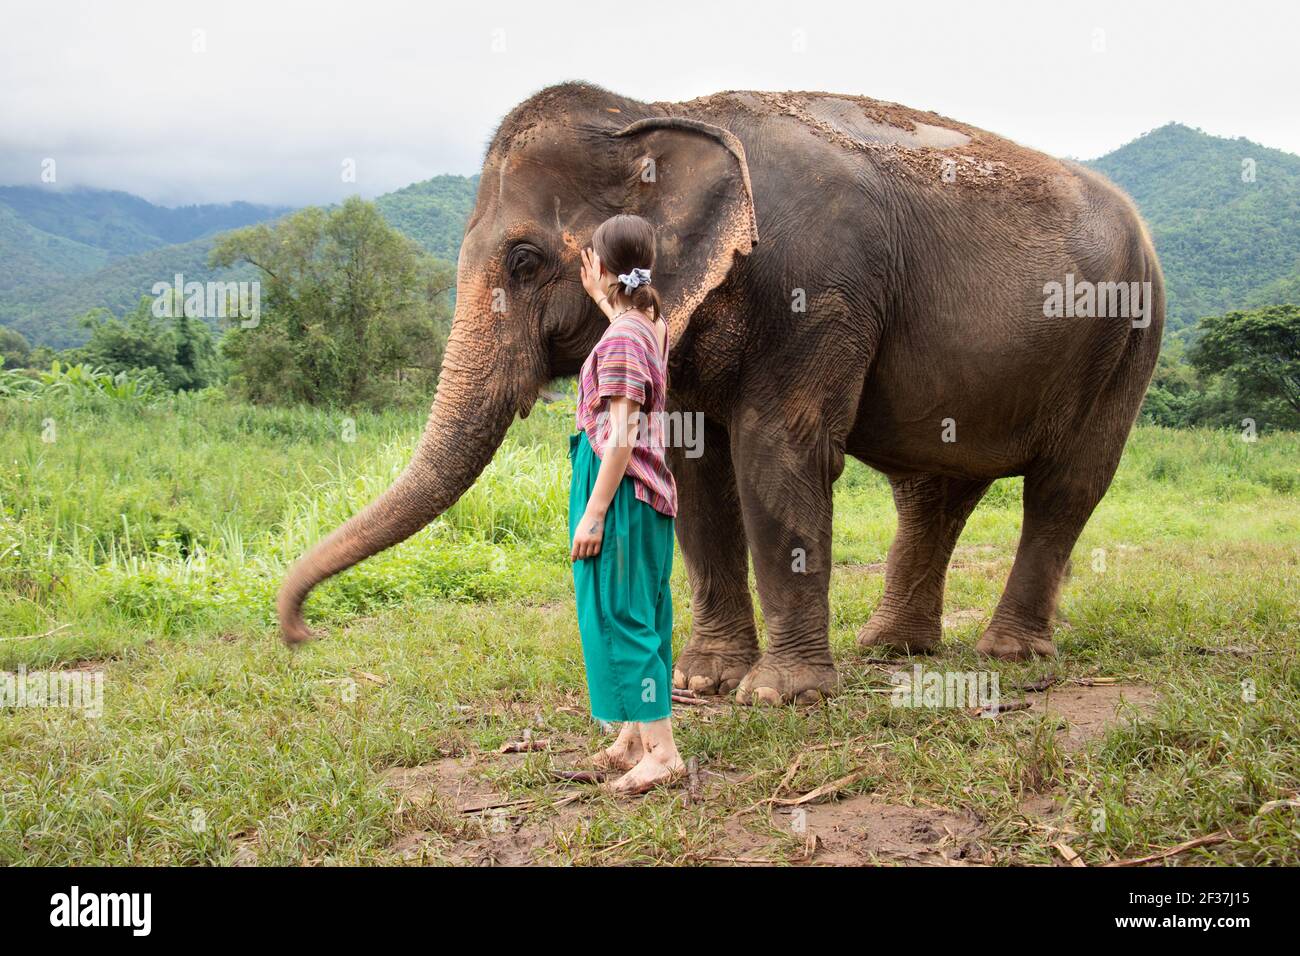 North of Chiang Mai, Thailand. A girl is stroking an elephant in a sanctuary for old elephants. Stock Photo